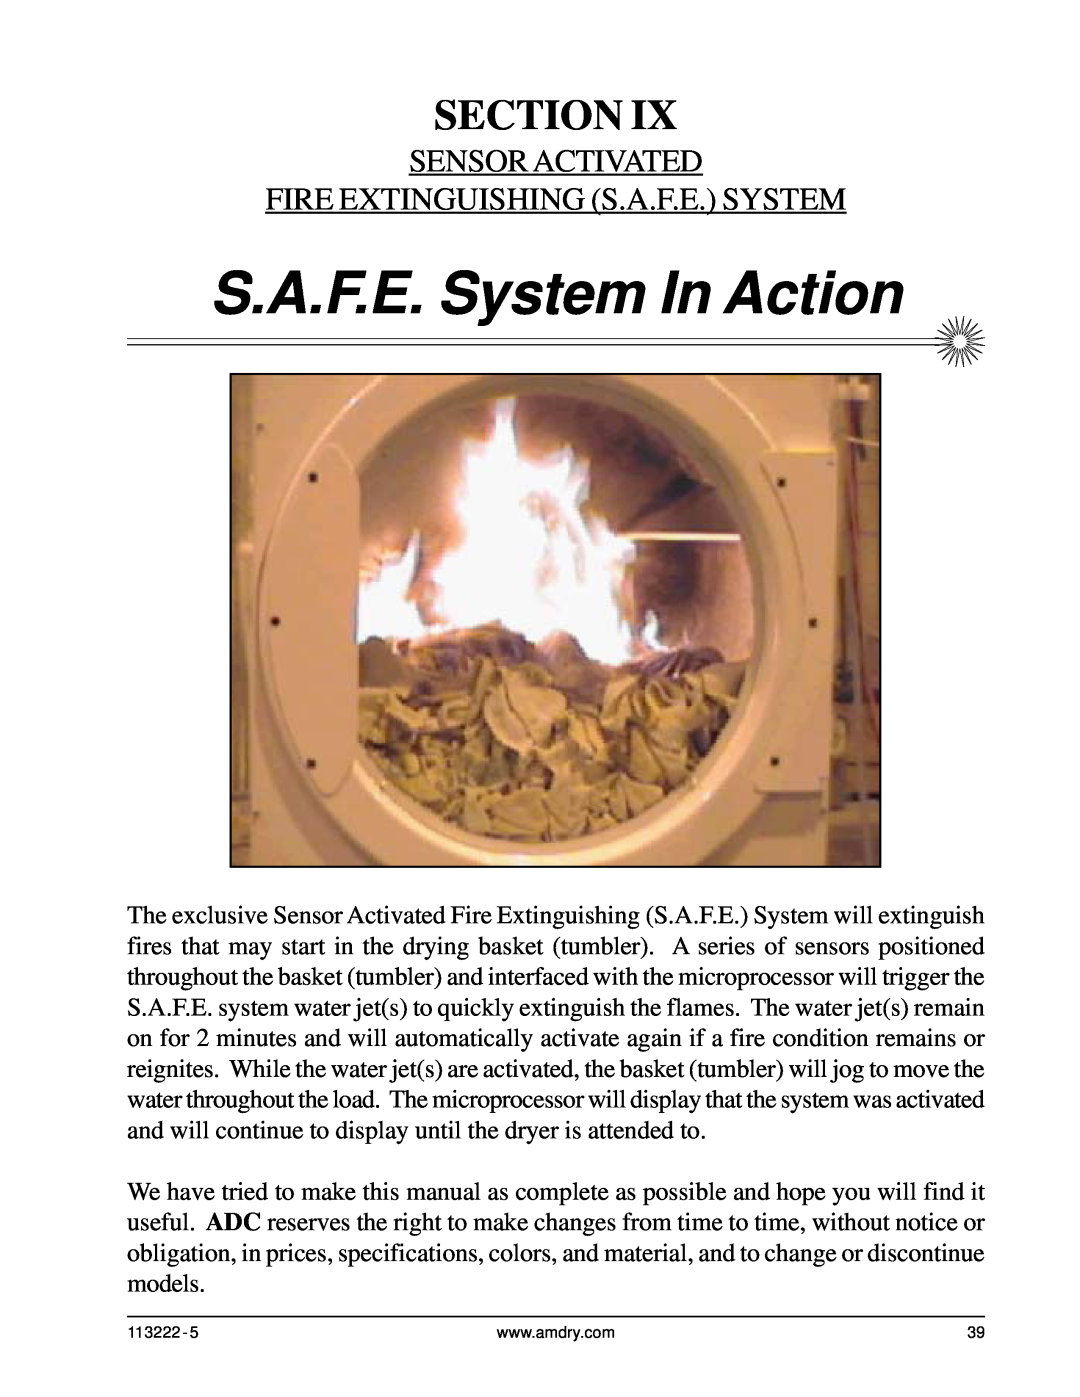 American Dryer Corp AD-24 Phase 7 Sensor Activated Fire Extinguishing S.A.F.E. System, S.A.F.E. System In Action, Section 